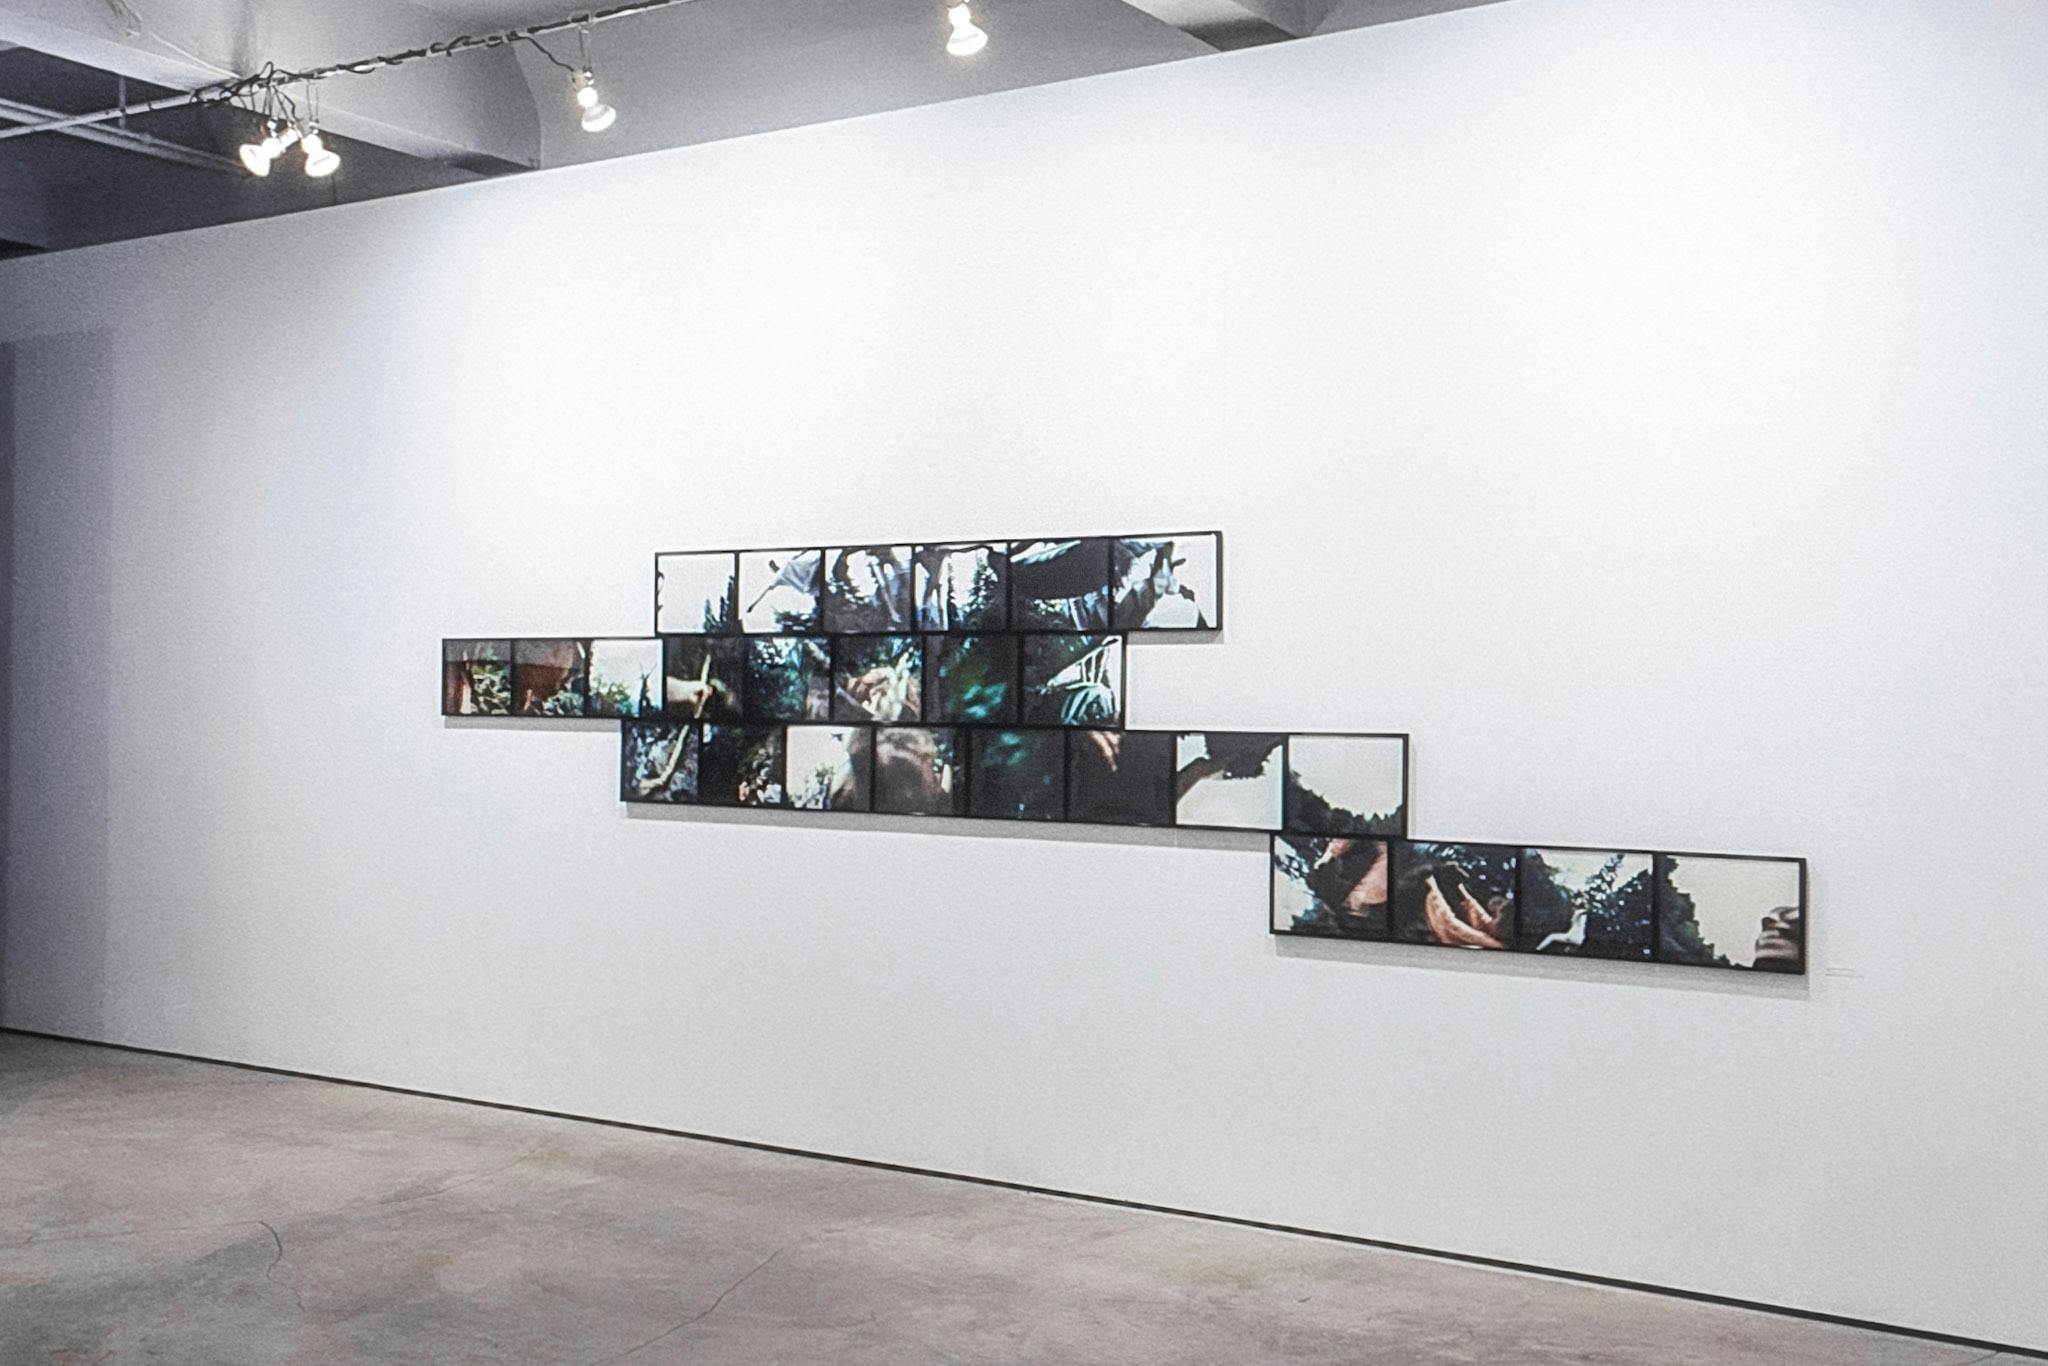 On the wall of a gallery, there are 28 cibachrome photographs in black frames, arranged in an irregular bond pattern. The photos show cropped images of people moving around outdoors, trees, and grass.